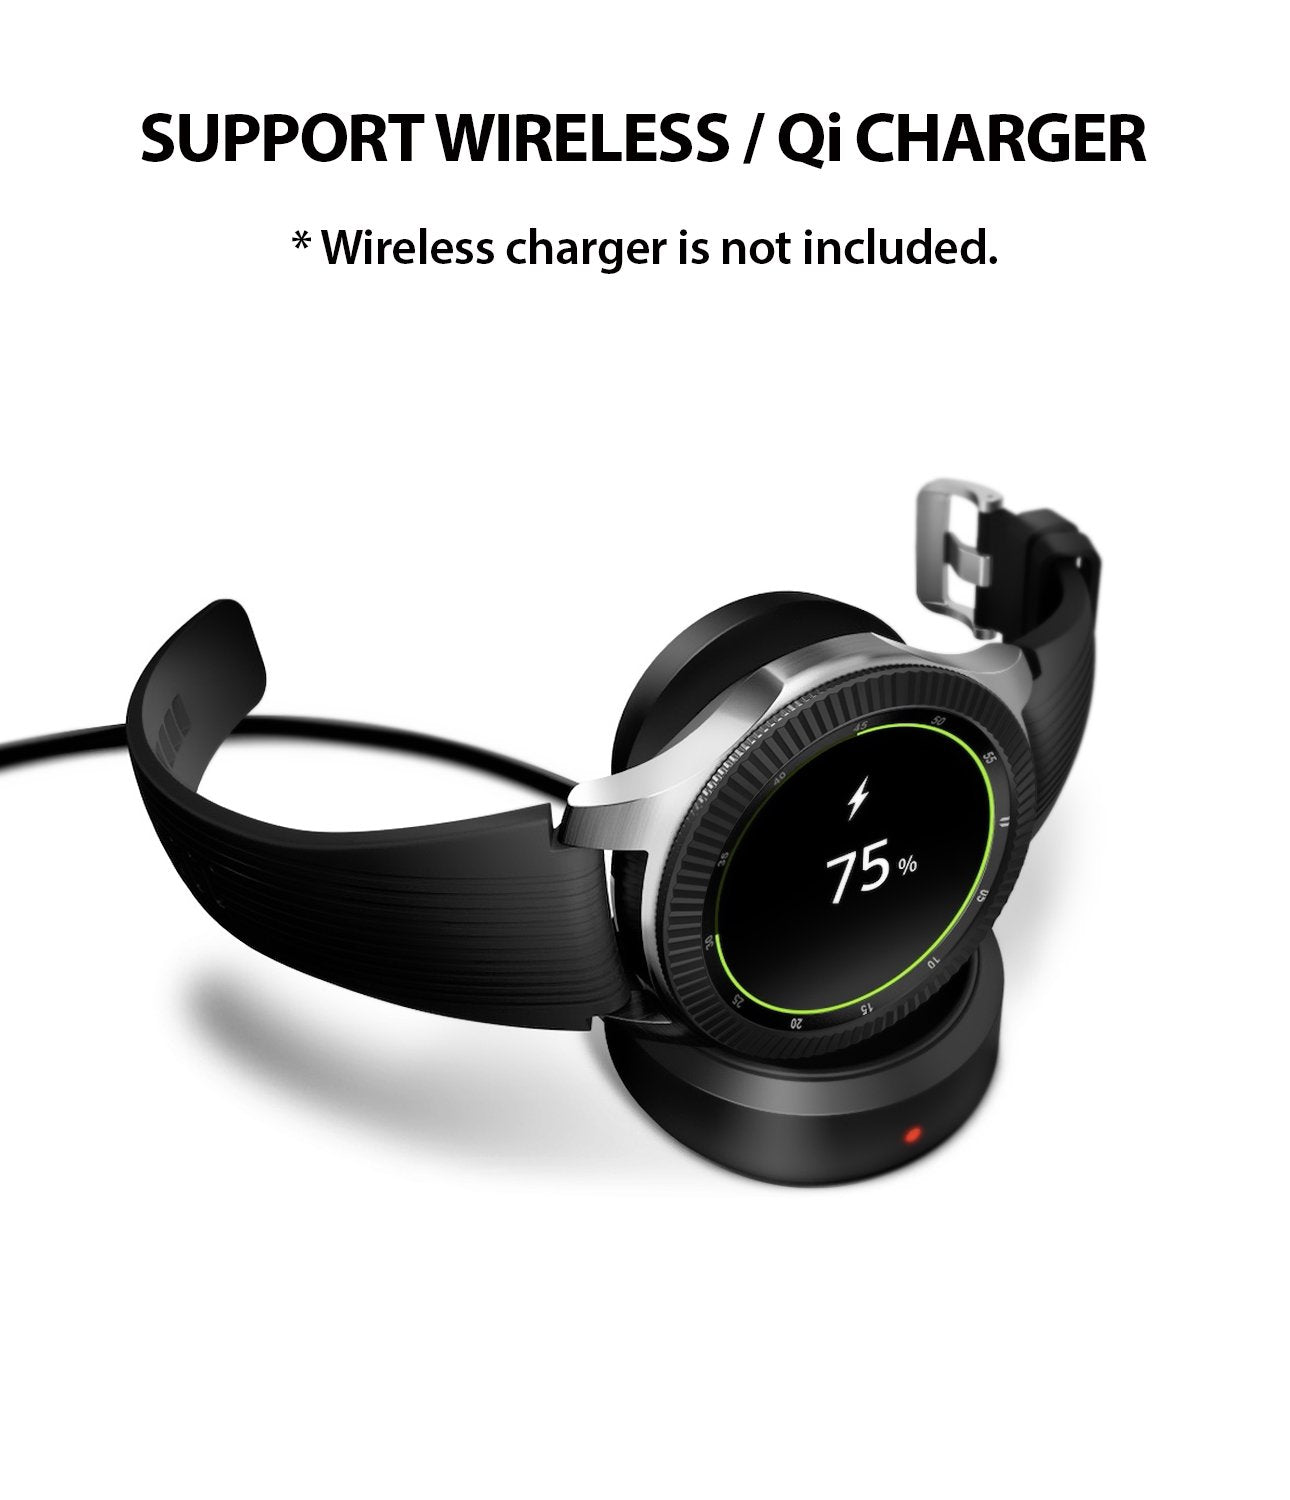 ringke bezel styling supports wirless and qi charging without removing the cover